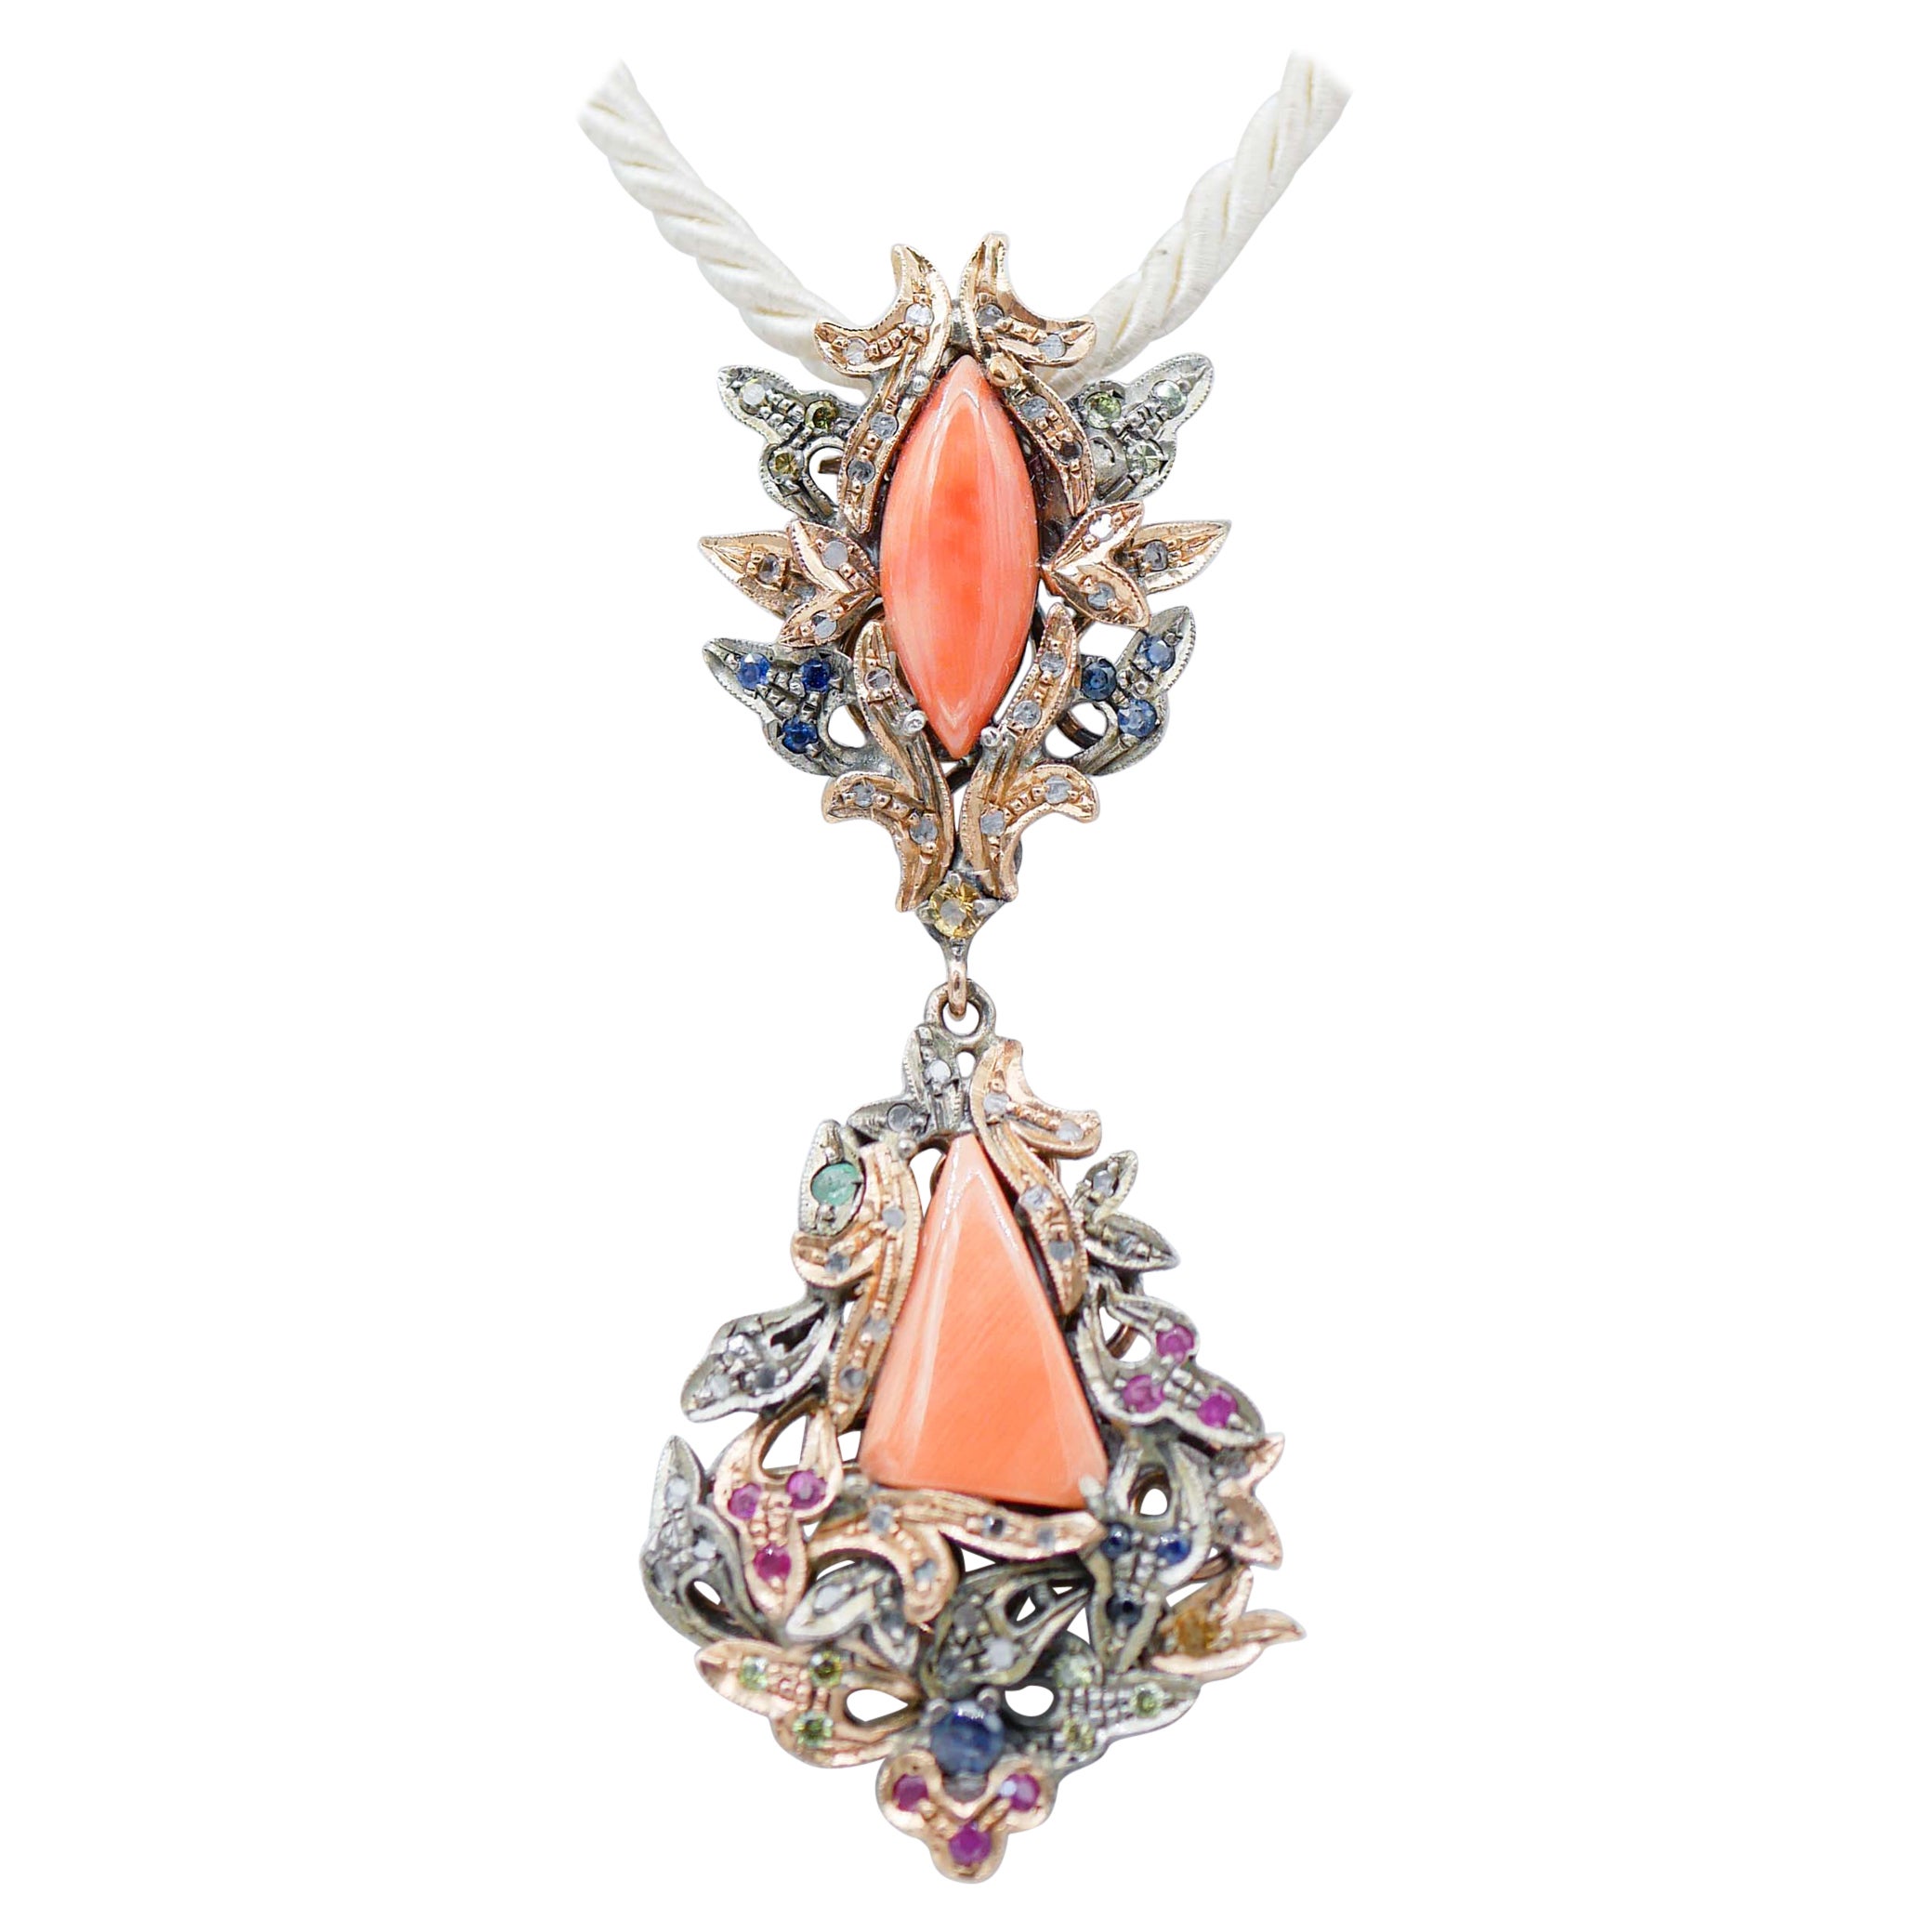 Coral, Emeralds, Diamonds, Rubies, Sapphires, Rose Gold and Silver Retrò Pendant For Sale